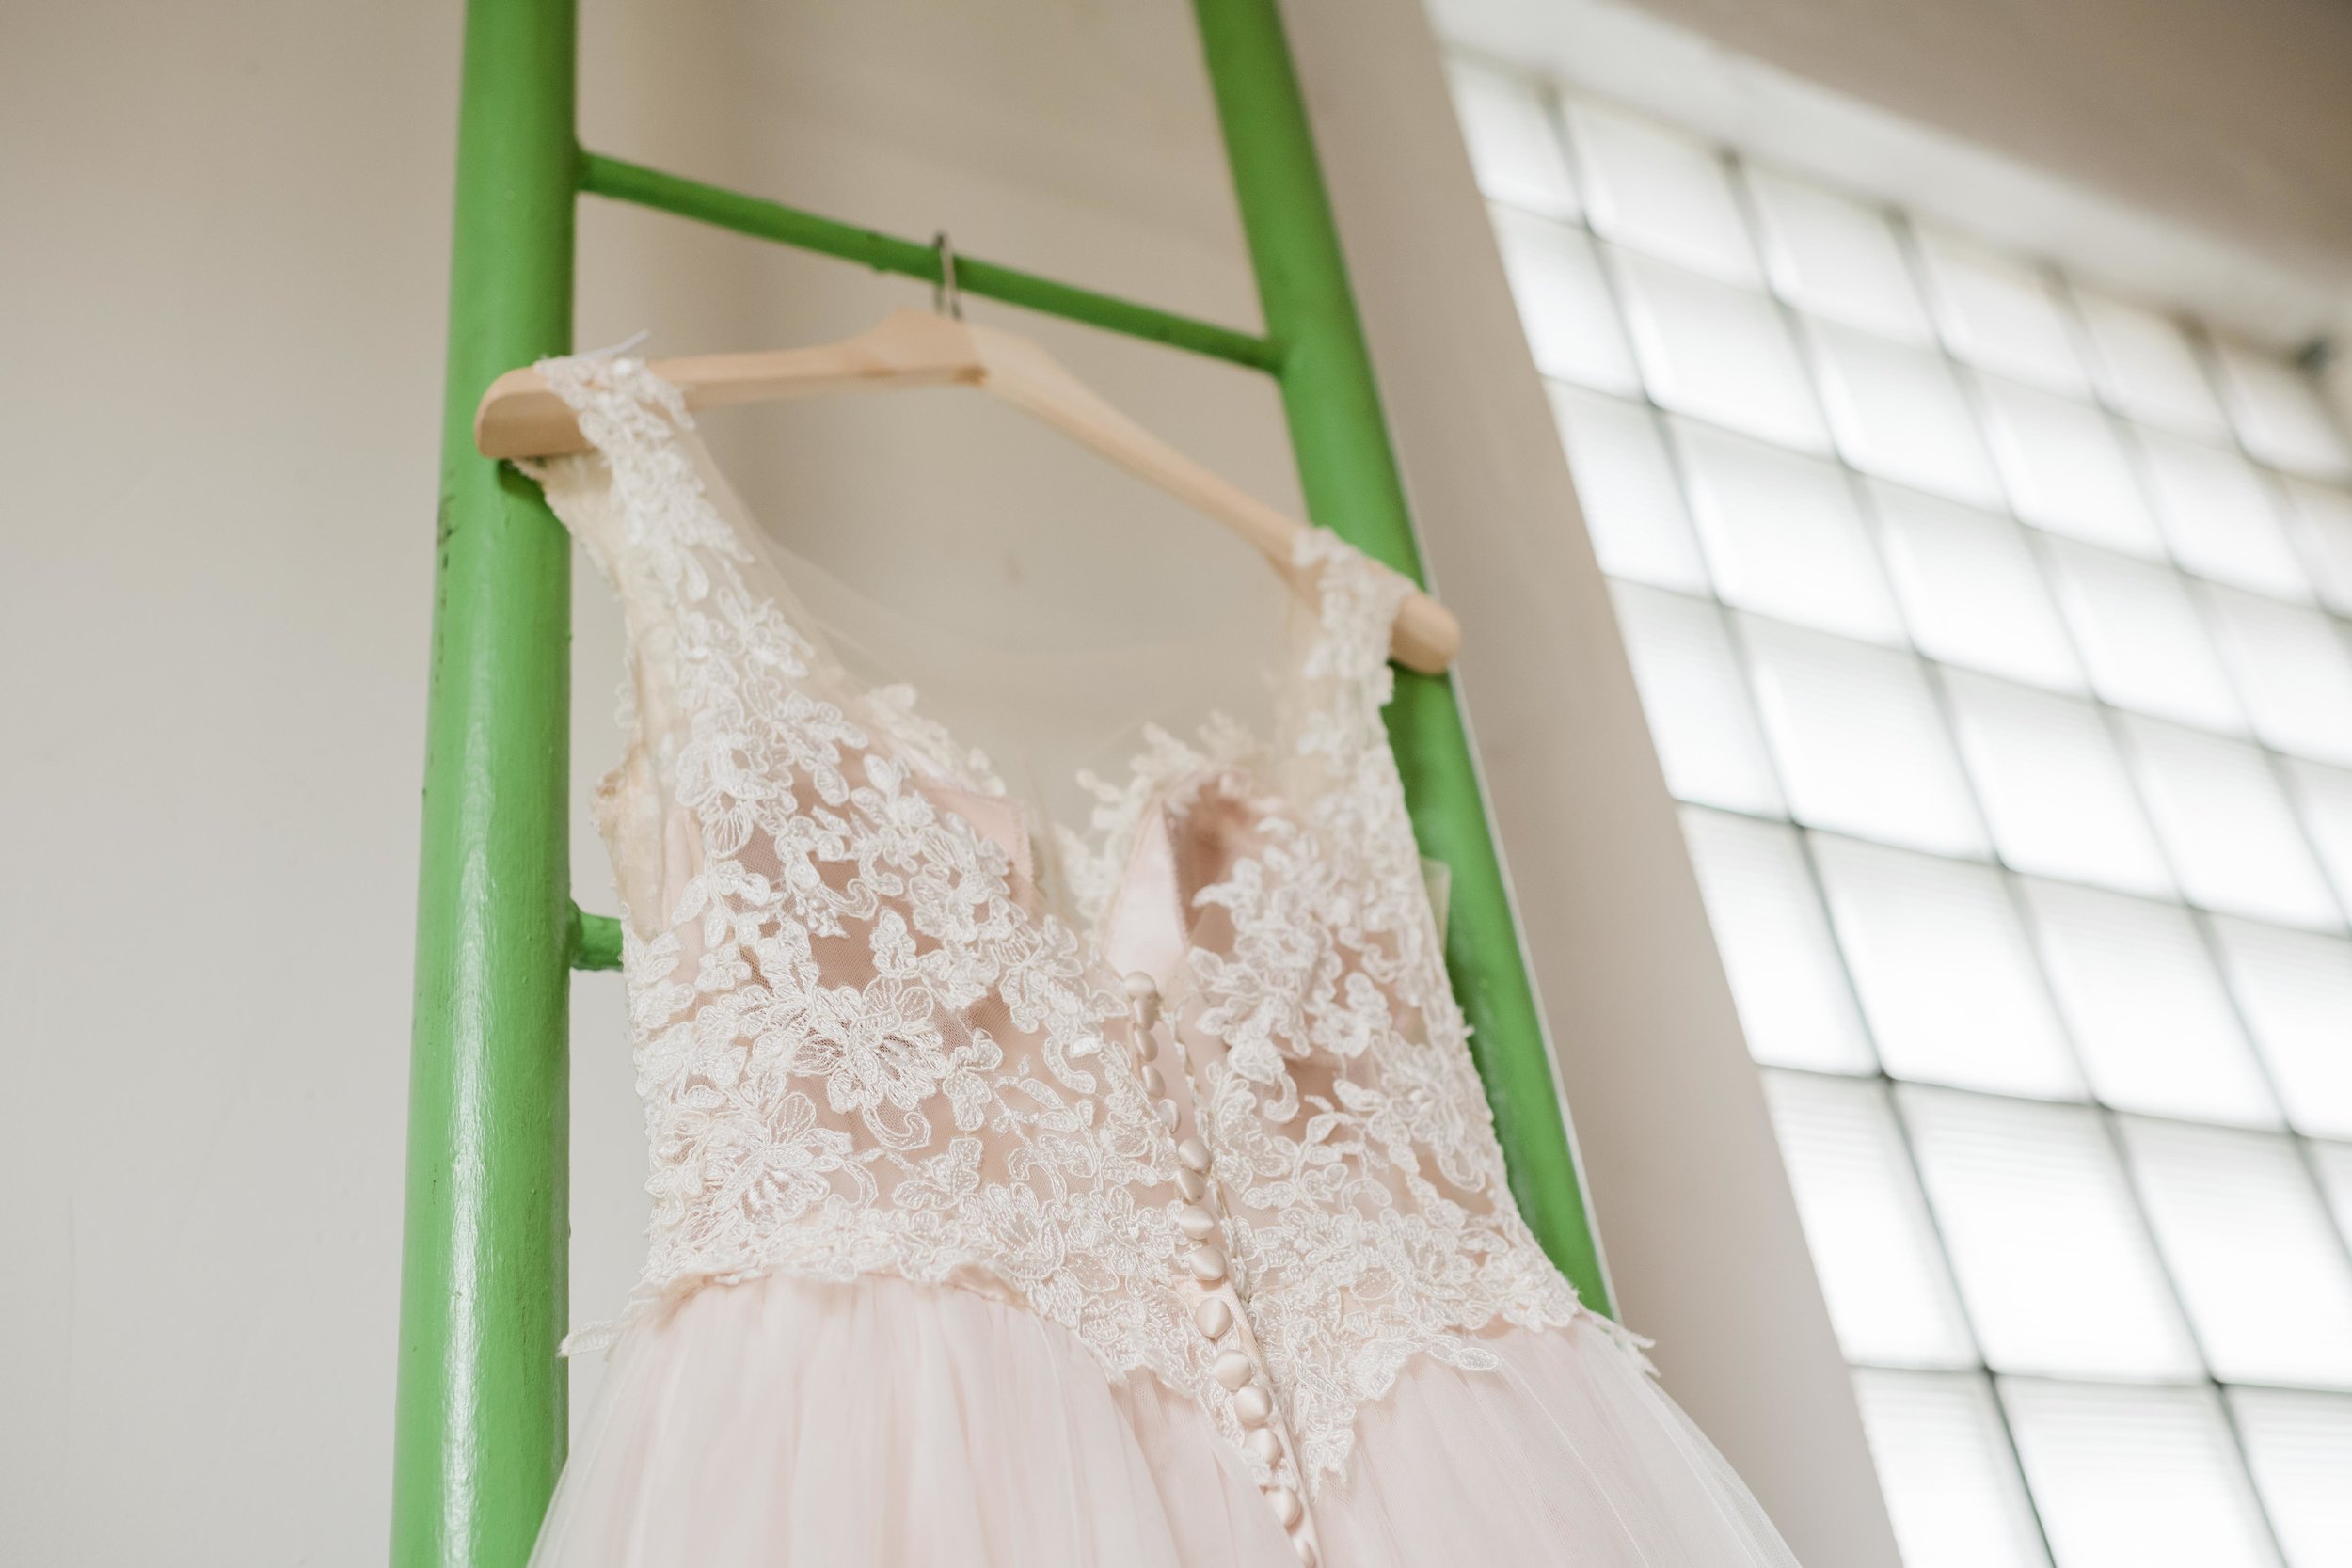 Bridal gown hanging on ladder